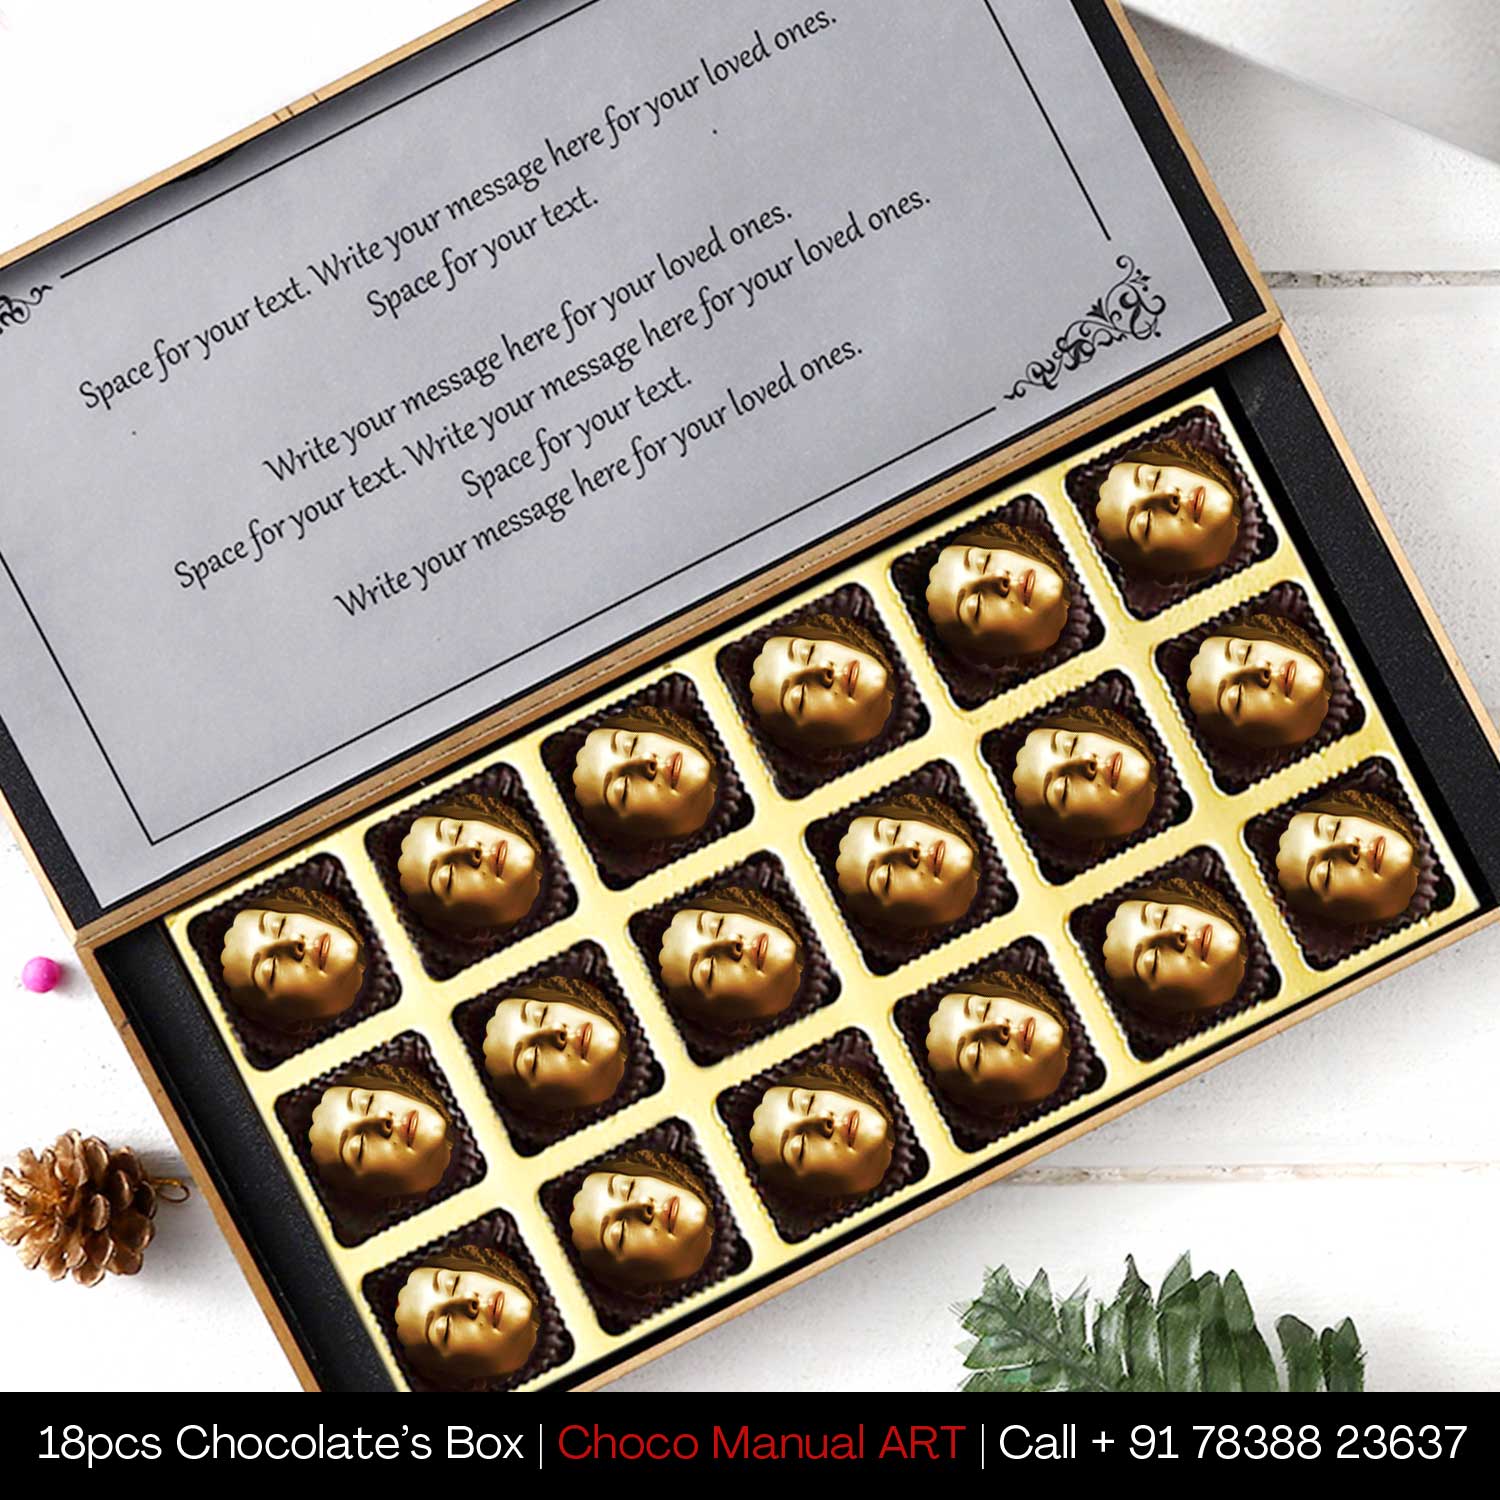  customized name chocolate personalized chocolates for birthday personalised chocolate name on chocolate bar personalised chocolates with photo customised chocolate wrapper customised chocolate gifts customised chocolate box